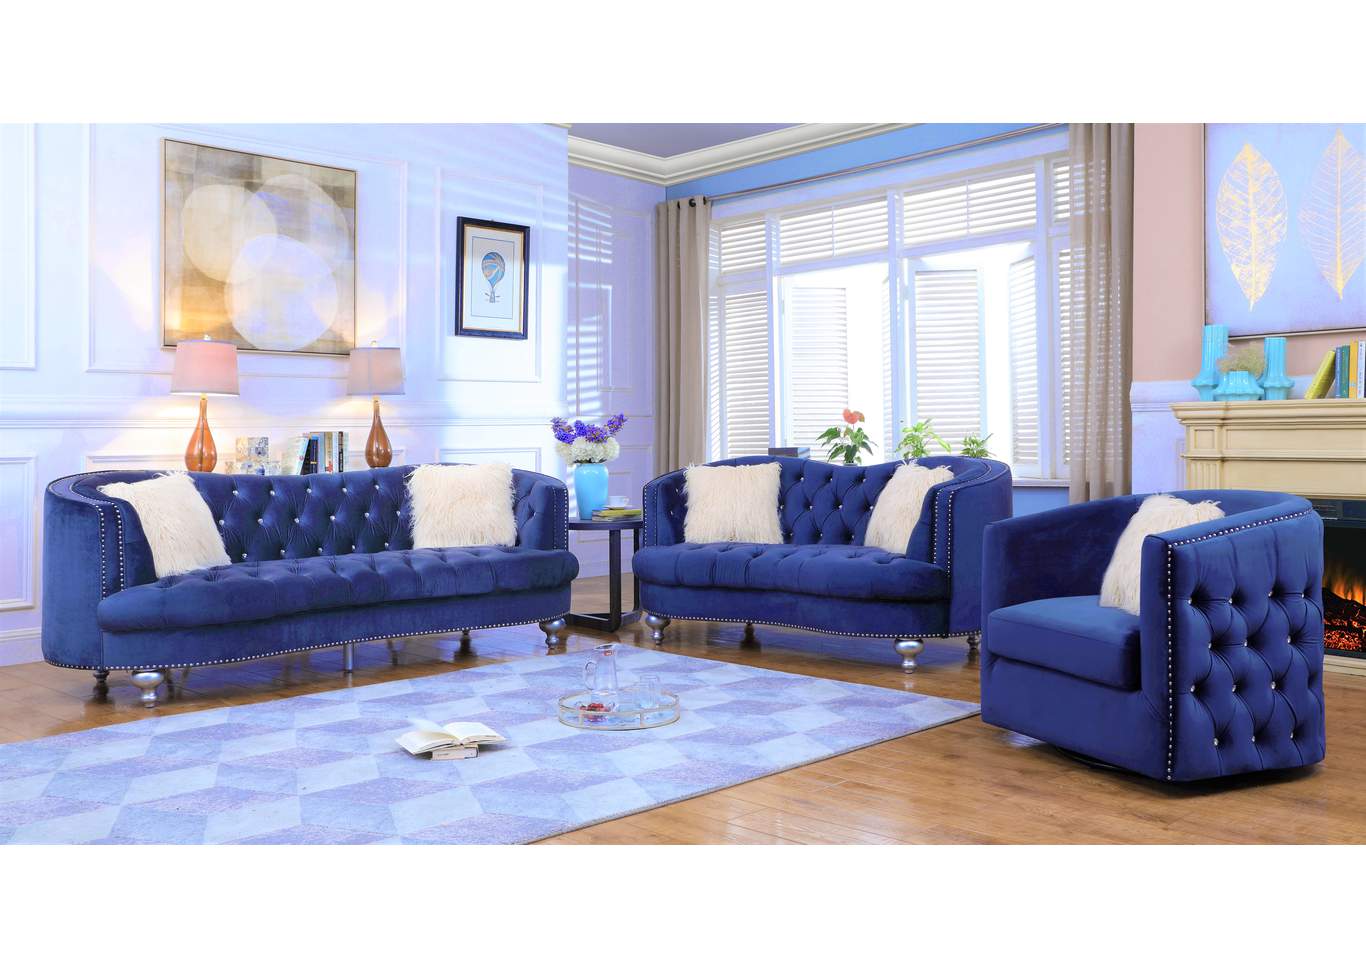 Upholstered Afreen Chair Navy,Galaxy Home Furniture